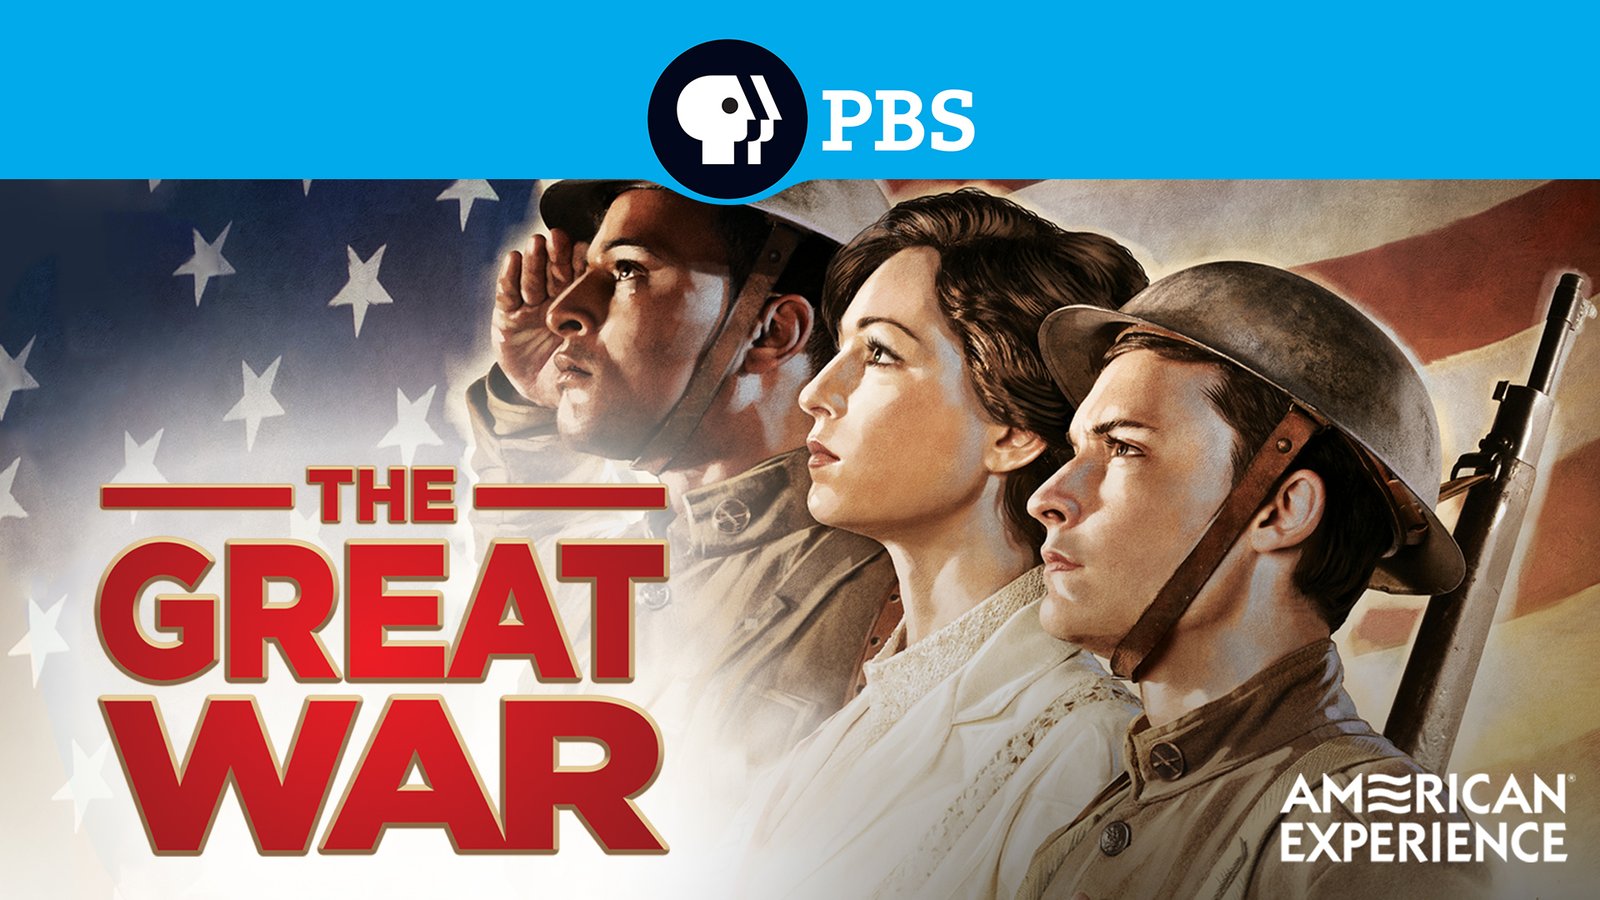 The Great War - The History of World War I